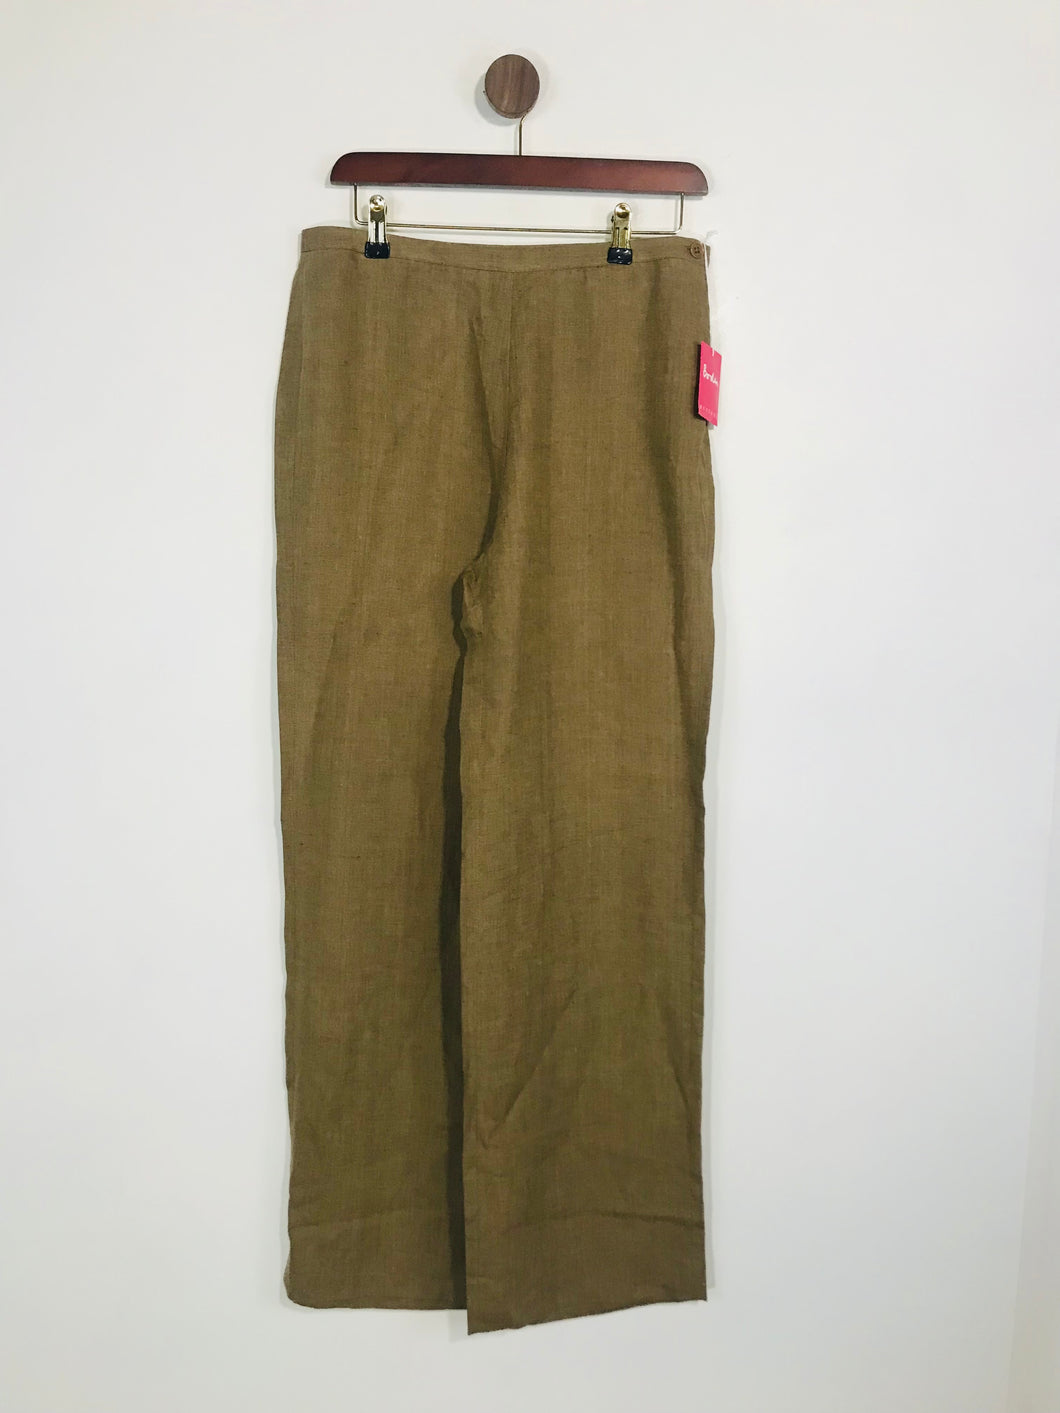 Boden Women's Linen Culottes Trousers NWT | UK12 | Brown